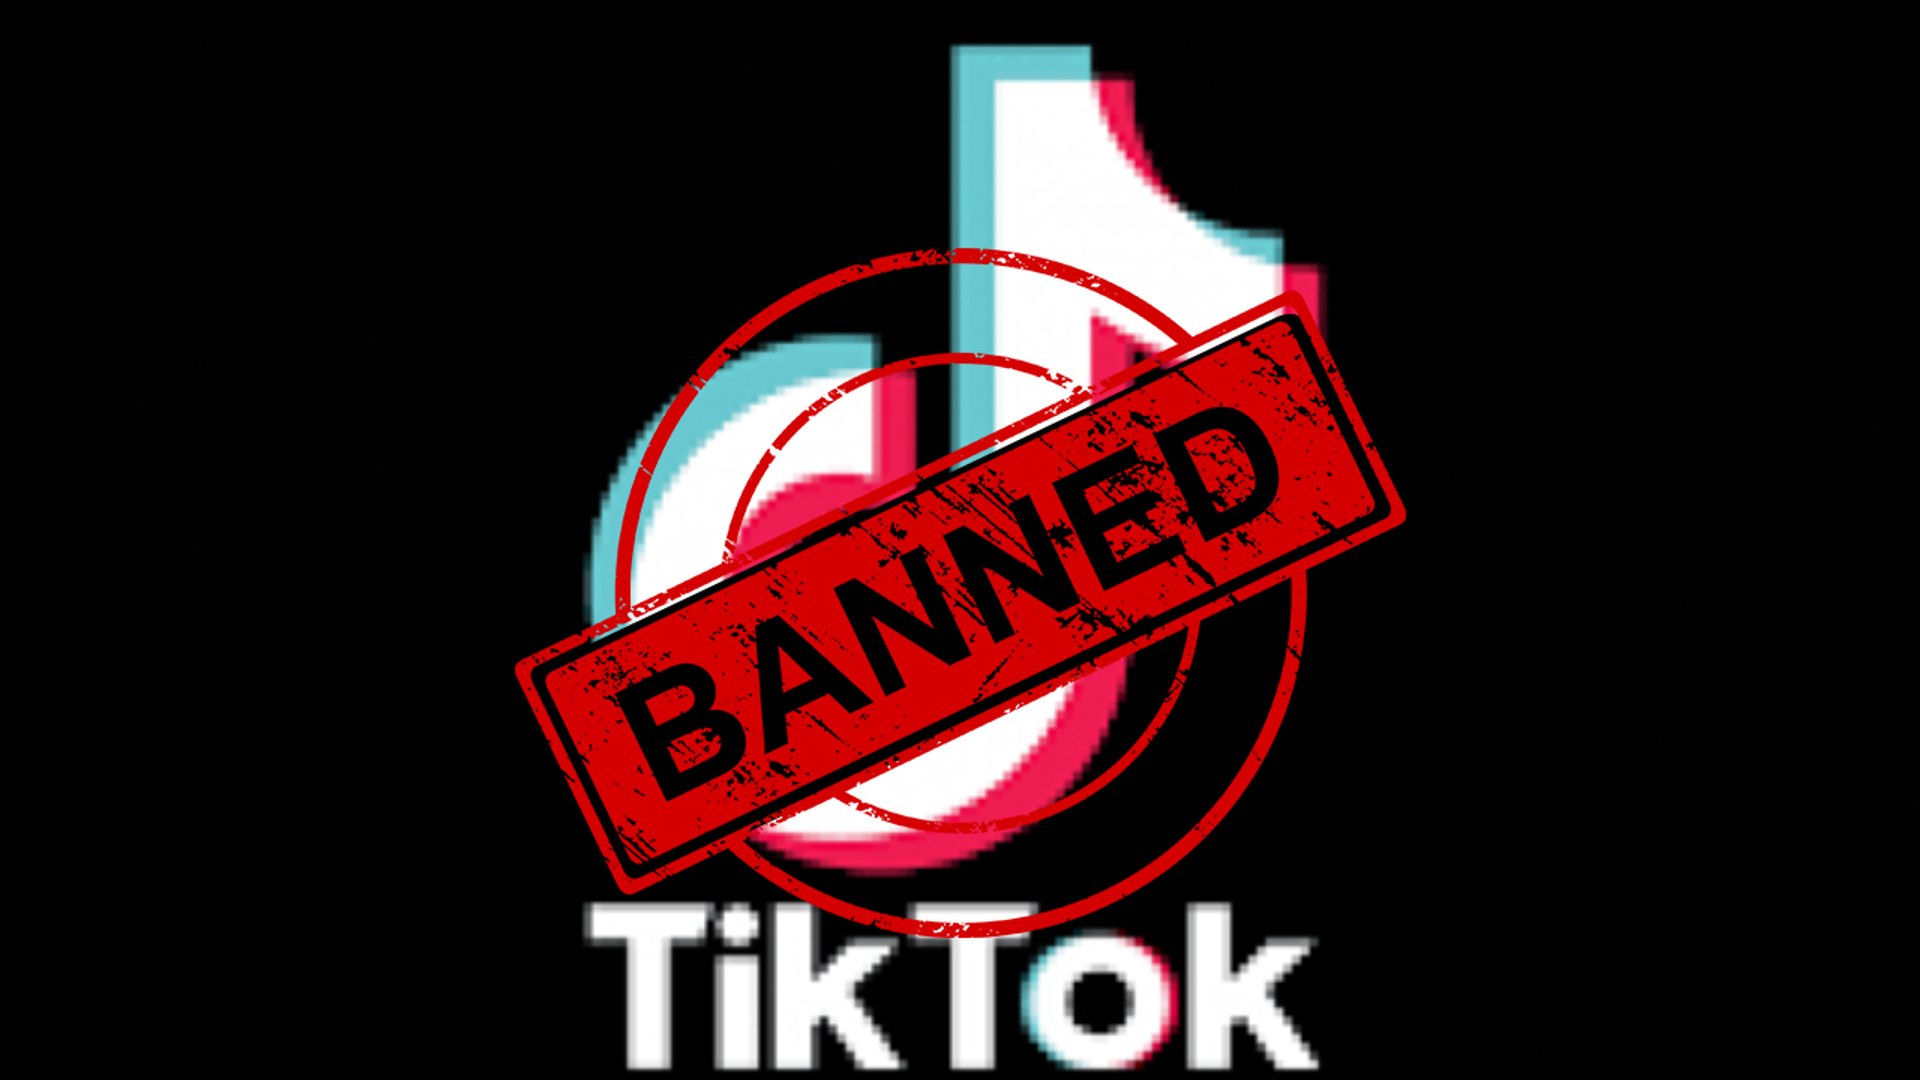 Use of TikTok banned on all state government devices and networks in Maryland, US